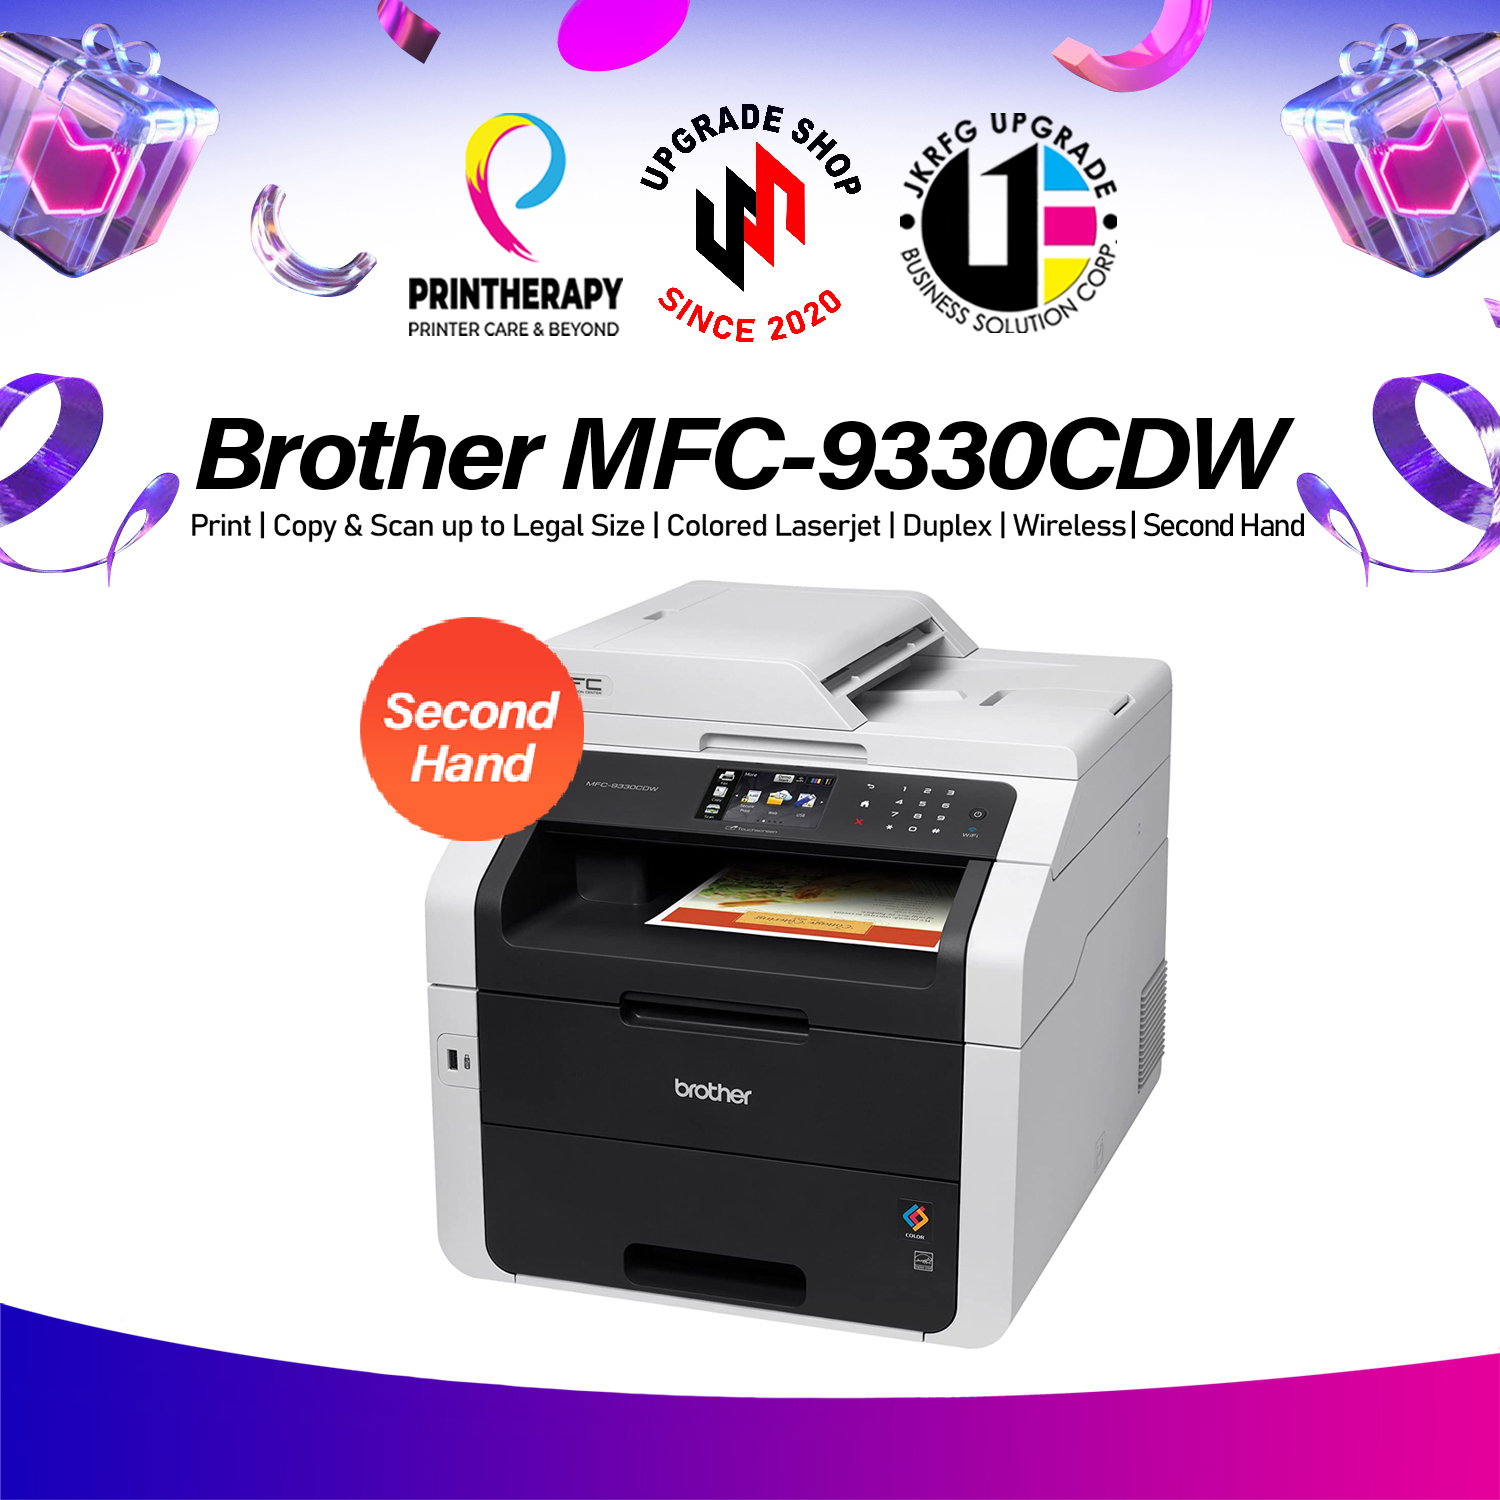 brother mfc 9330cdw fax setup